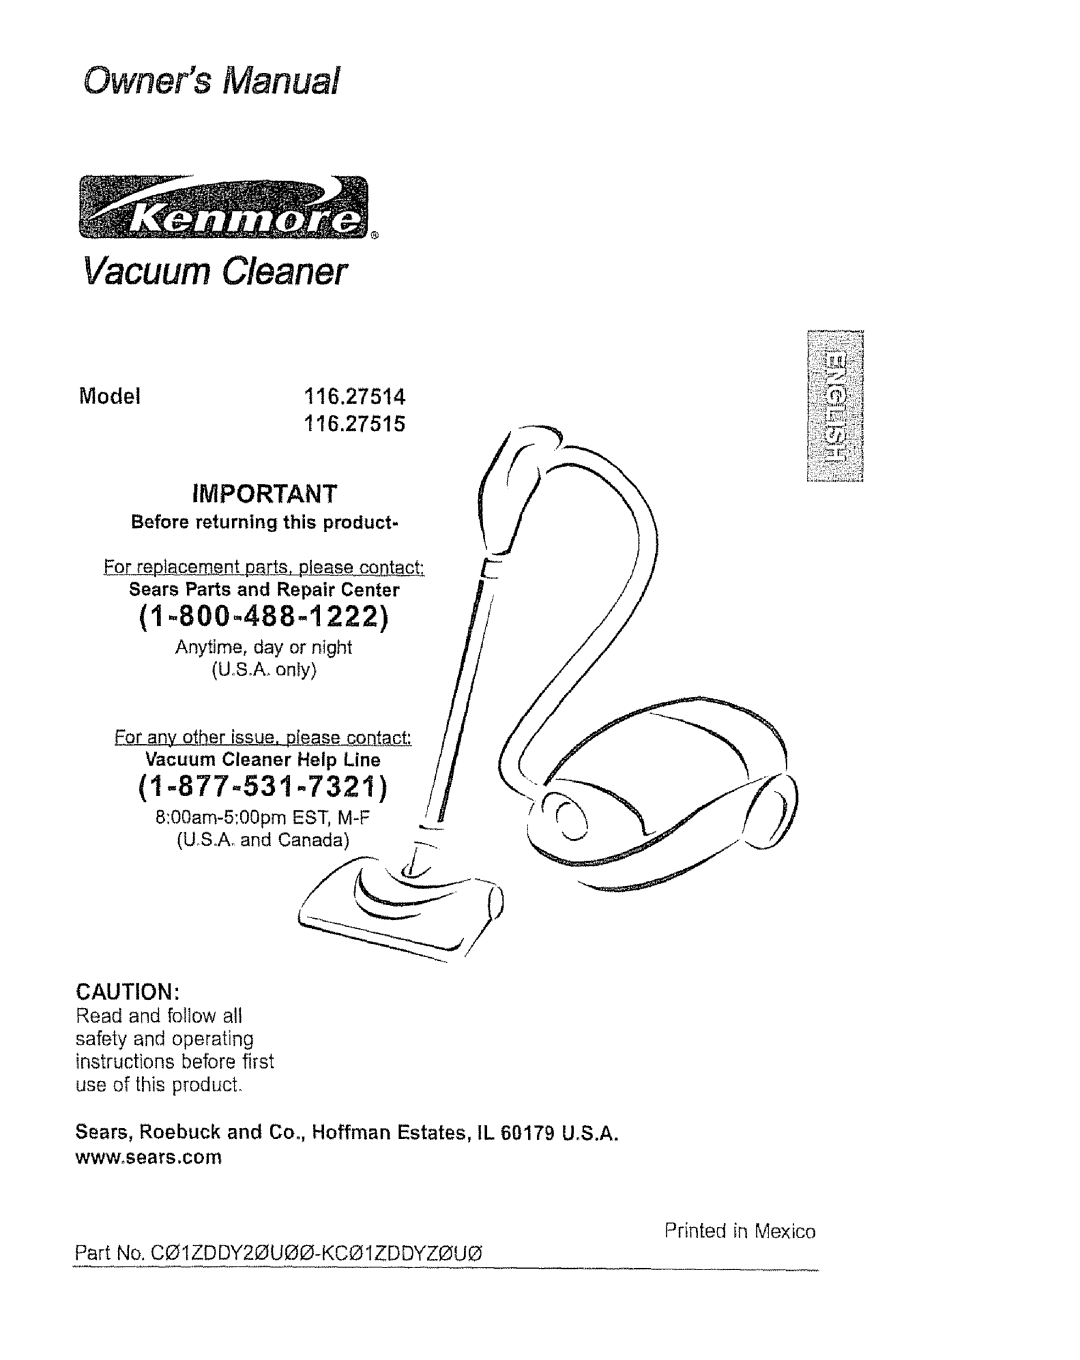 Kenmore 116.27514 owner manual Vacuum Cleaner, 1=877-531-7321, 116.27515, Before returning this product 